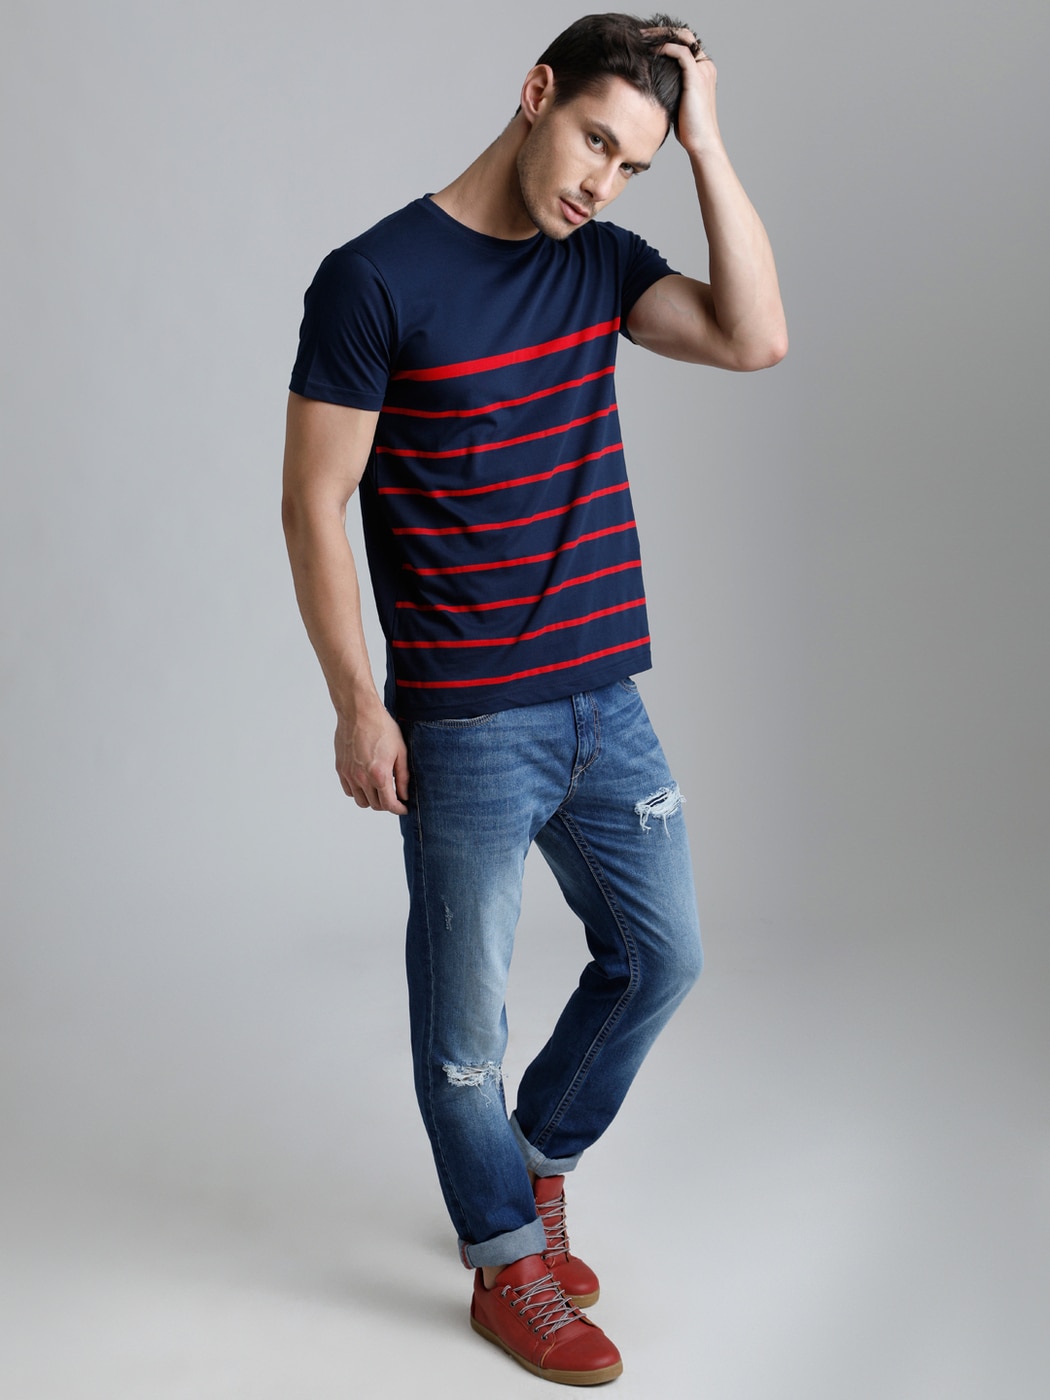 Clothing for Men | Shop the Latest Men's Wear, Jeans, Shirts, T-Shirts and  more at Pepe Jeans India!